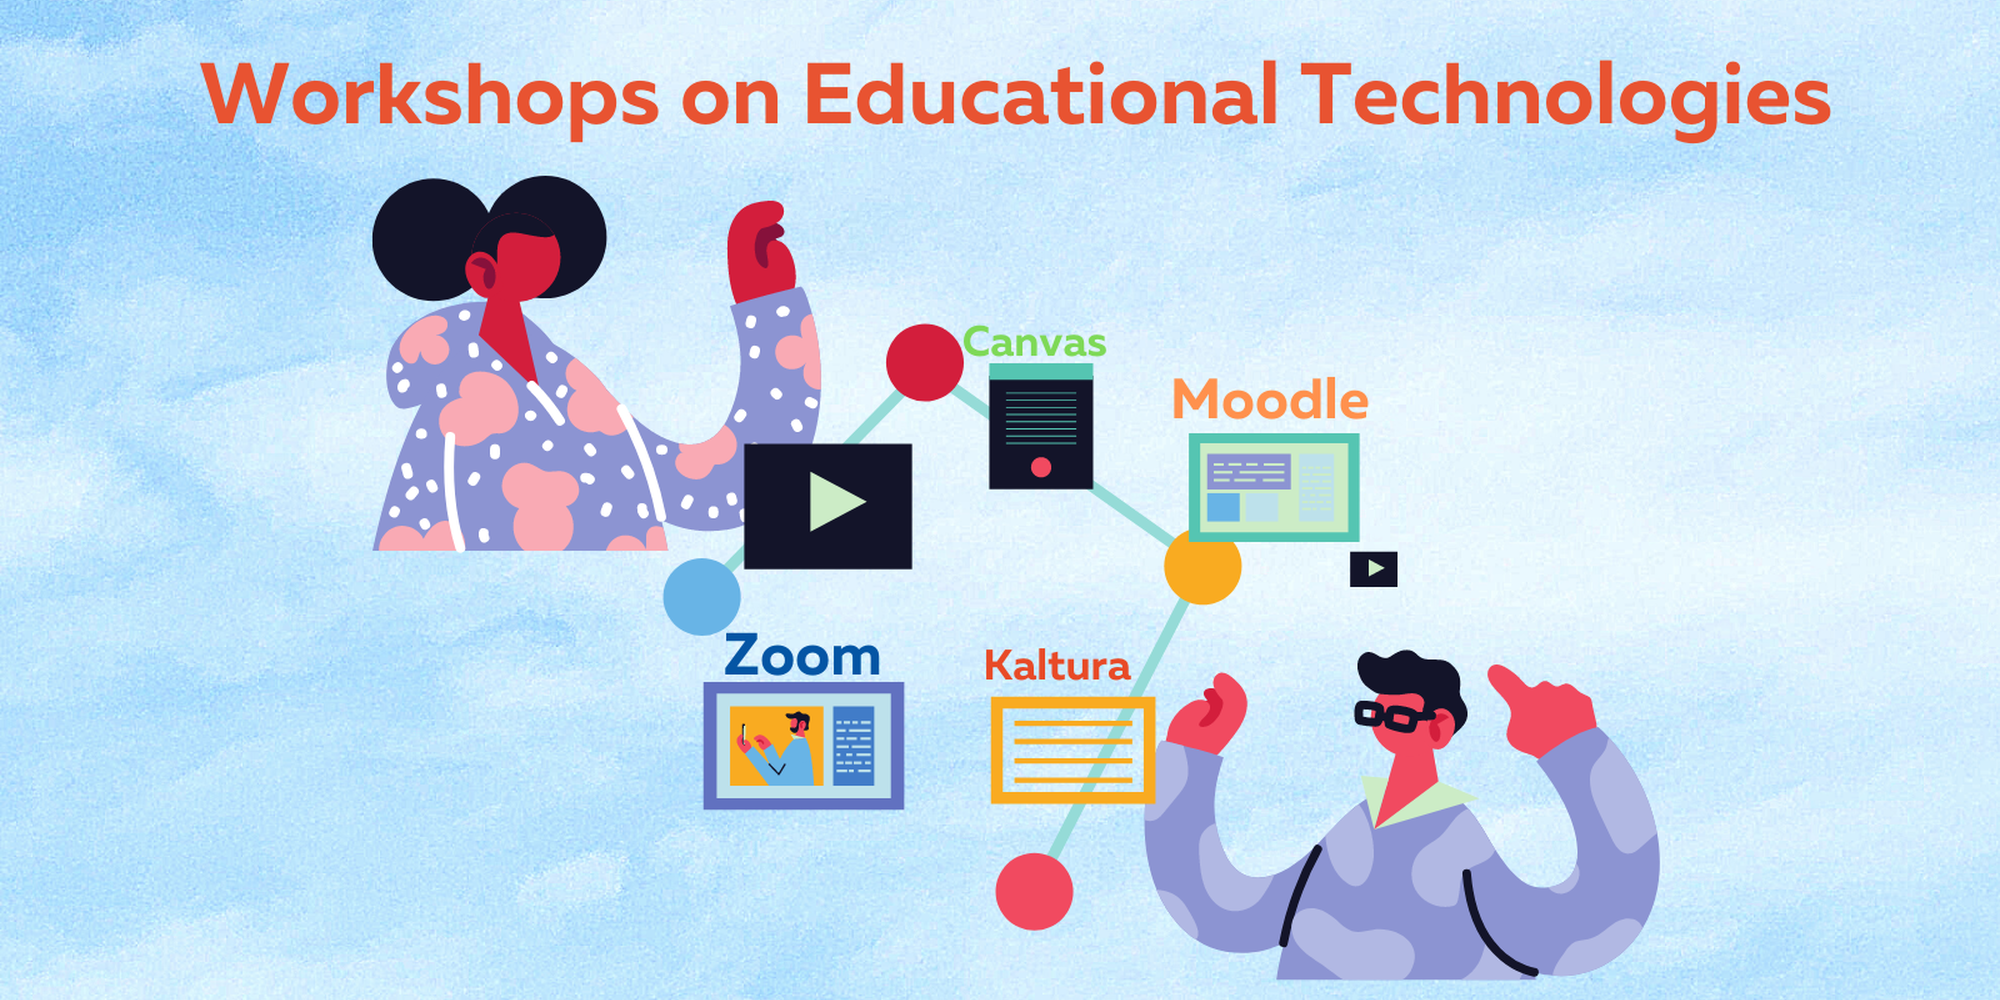 Illustrated graphic connecting Zoom, Canvas, Moodle, and Kaltura